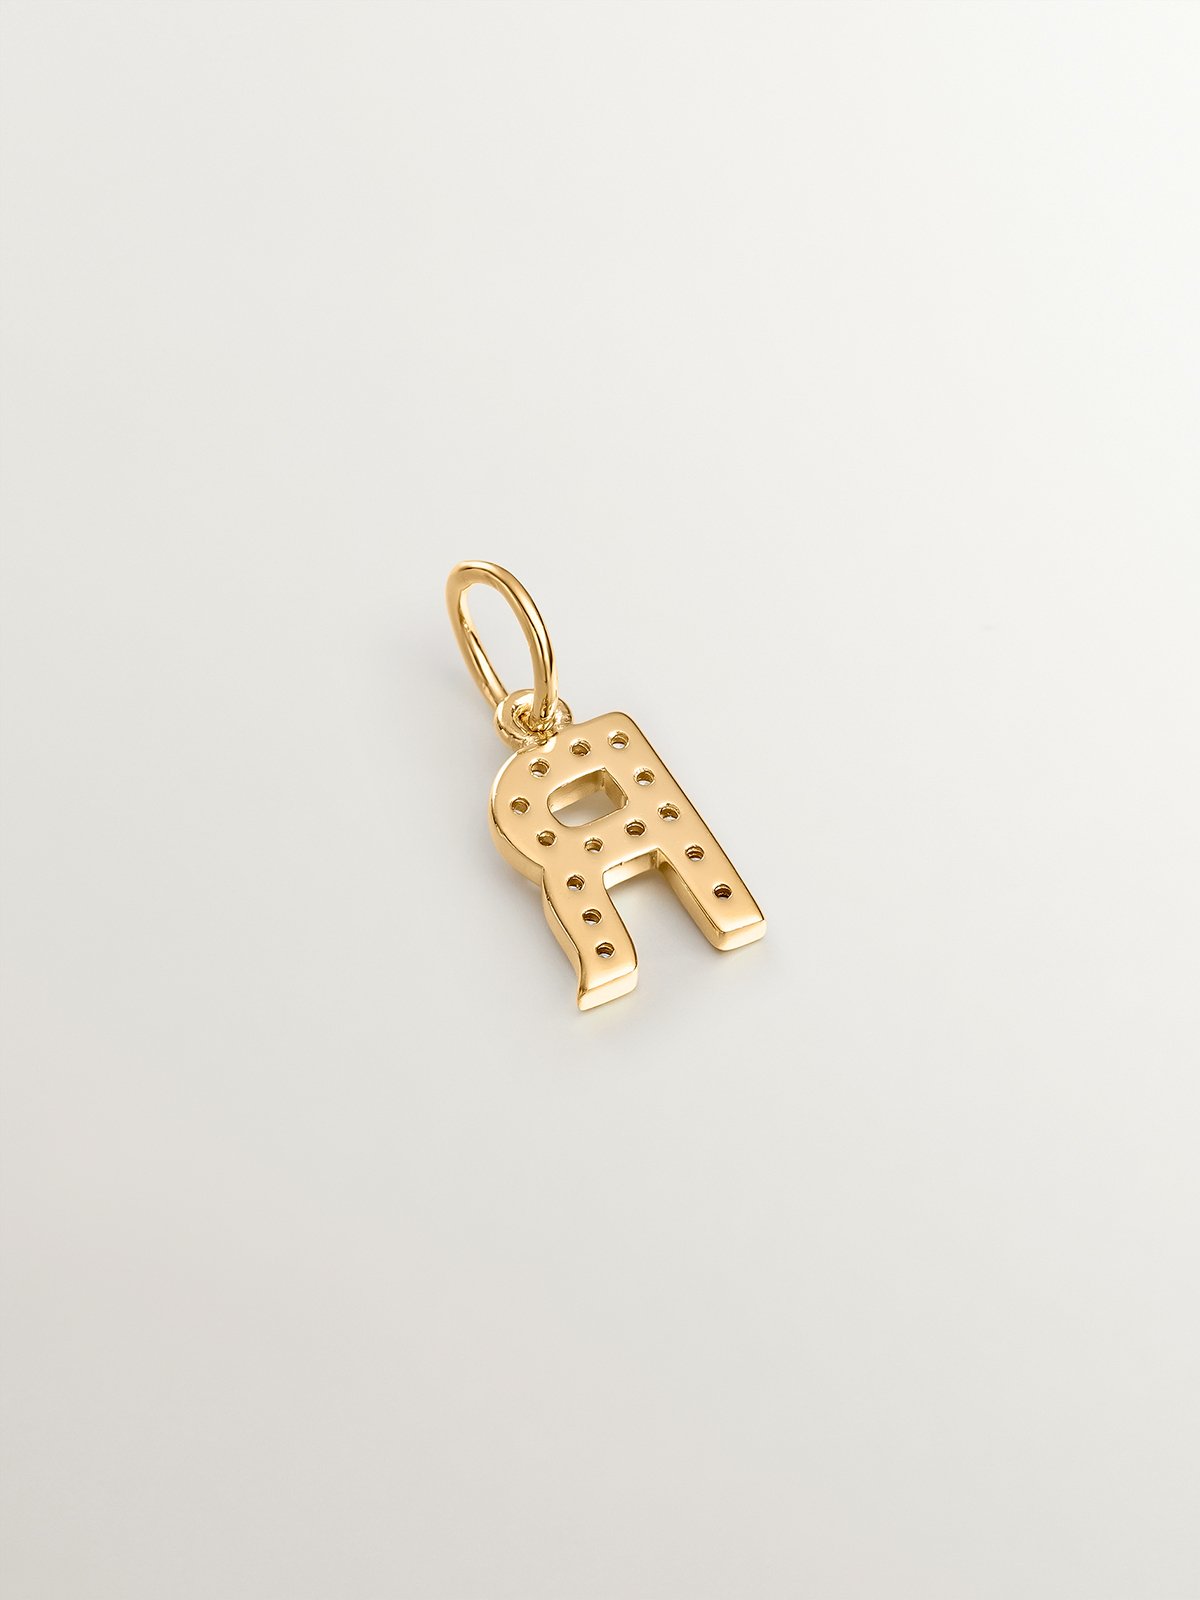 925 Silver charm bathed in 18K yellow gold with white topazes initial R